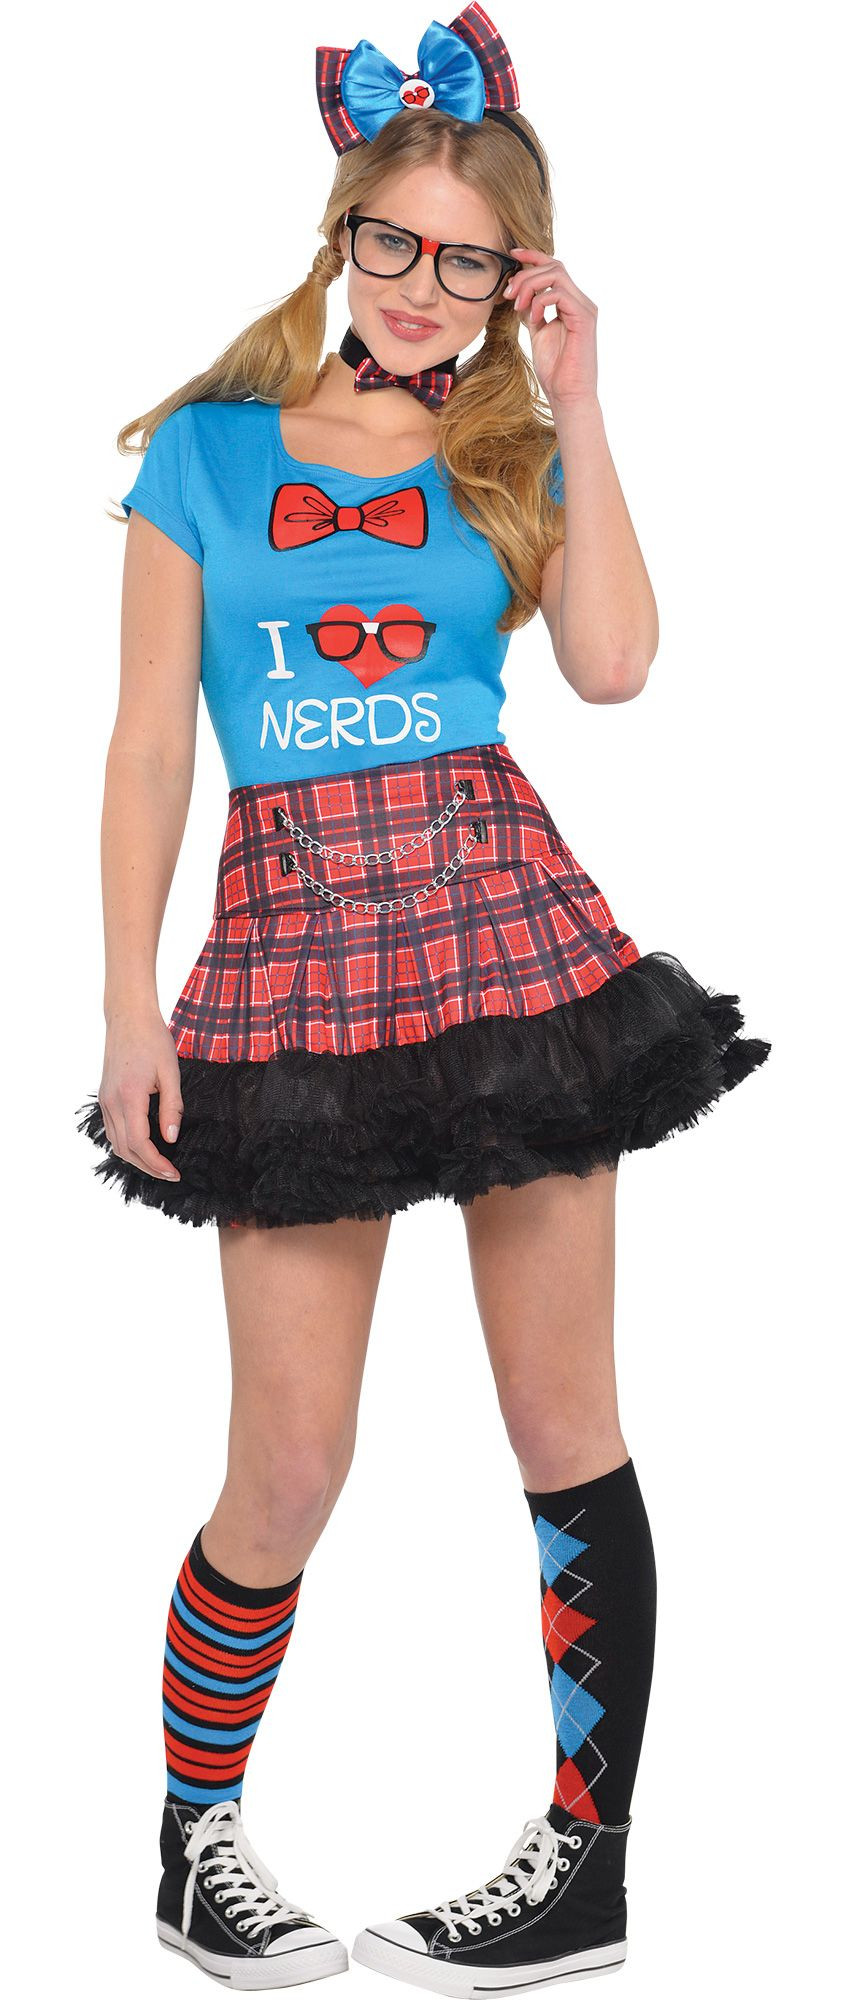 Halloween Costumes In Party City
 Women s Geek Chic Nerd Costume Accessories Party City